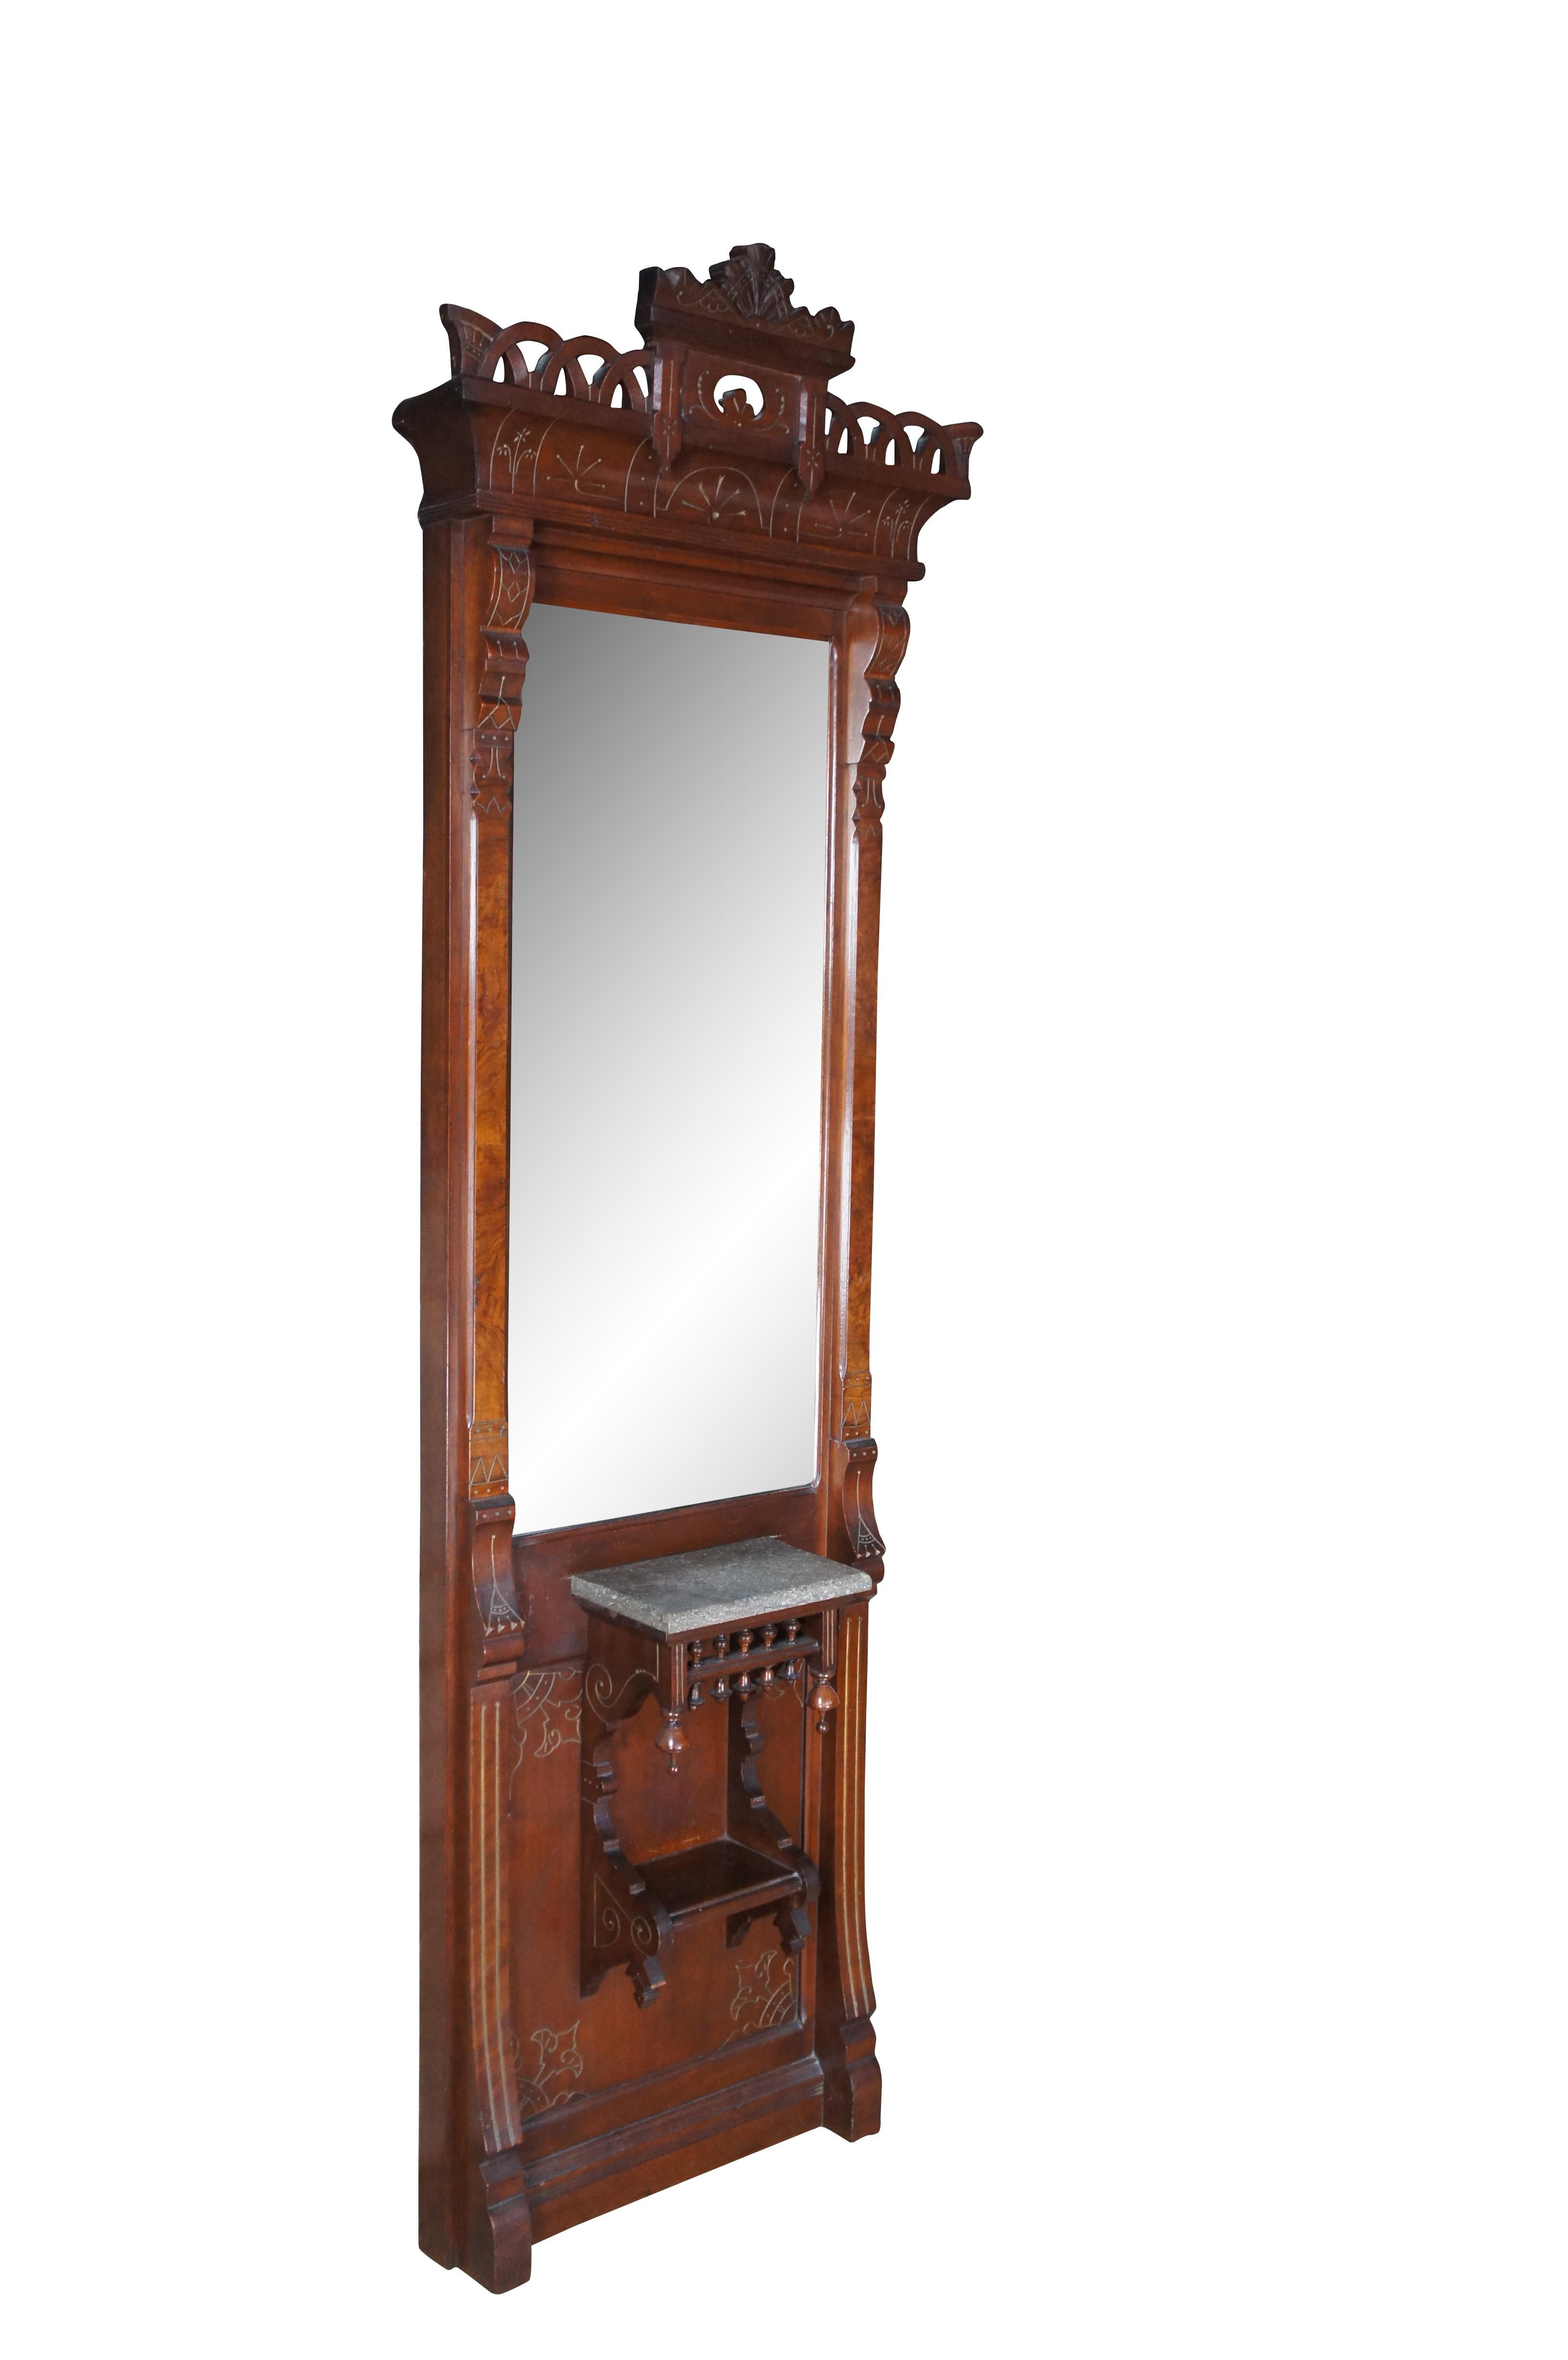 Antique Victorian / Aesthetic period hall pier mirror.  Made of mahogany featuring Eastlake styling with pierced / reticulated crown, flamed panels and granite top table / stand.

Dimensions:
23